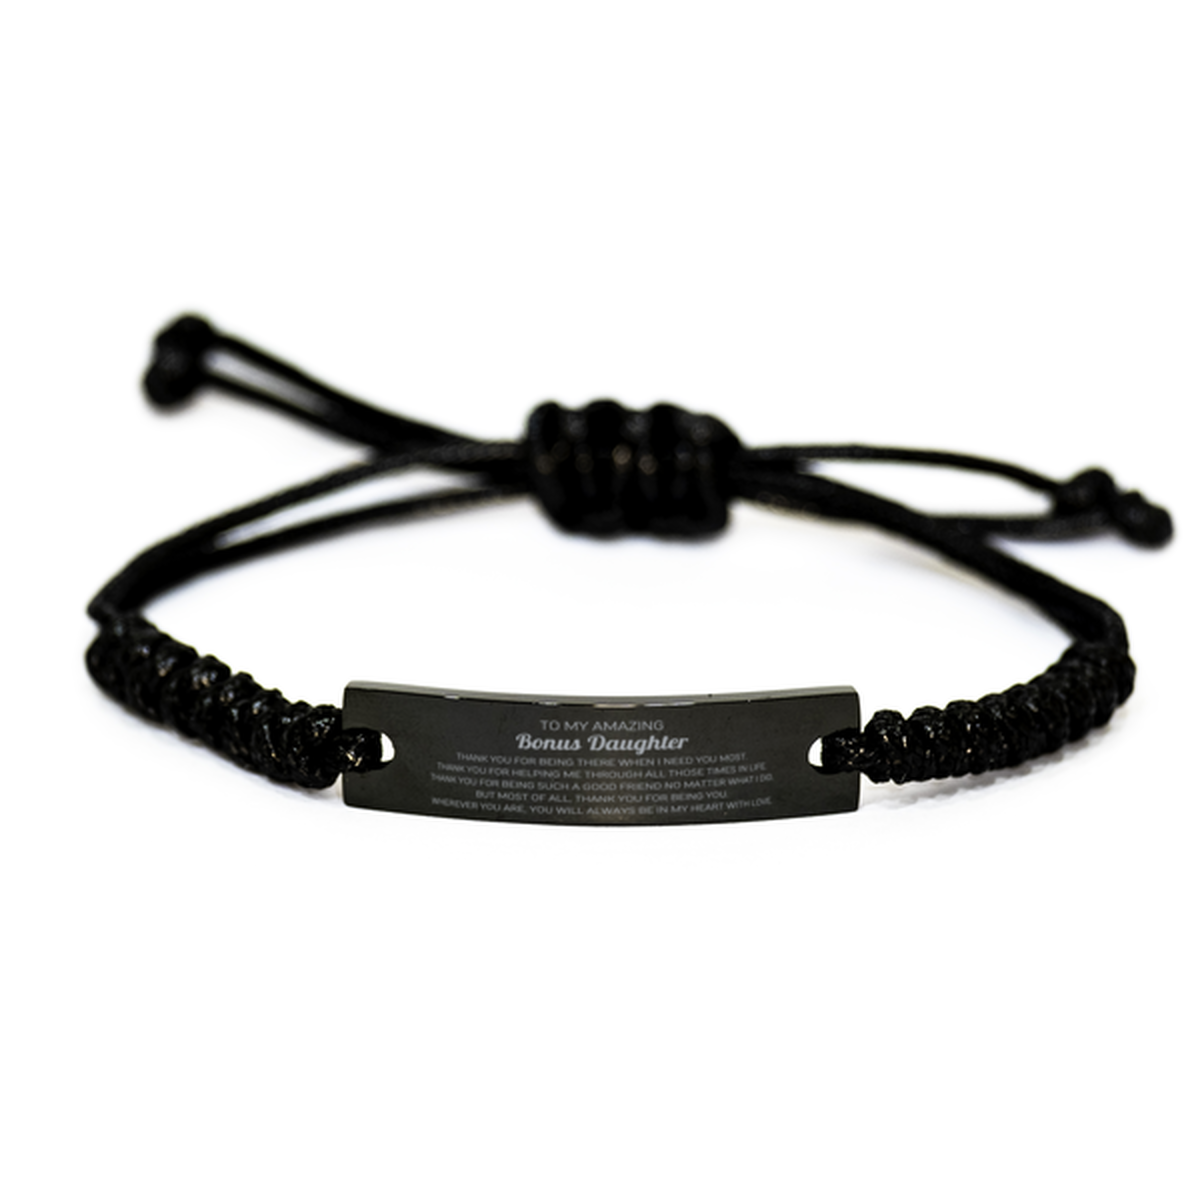 To My Amazing Bonus Daughter Black Rope Bracelet, Thank you for being there, Thank You Gifts For Bonus Daughter, Birthday, Christmas Unique Gifts For Bonus Daughter